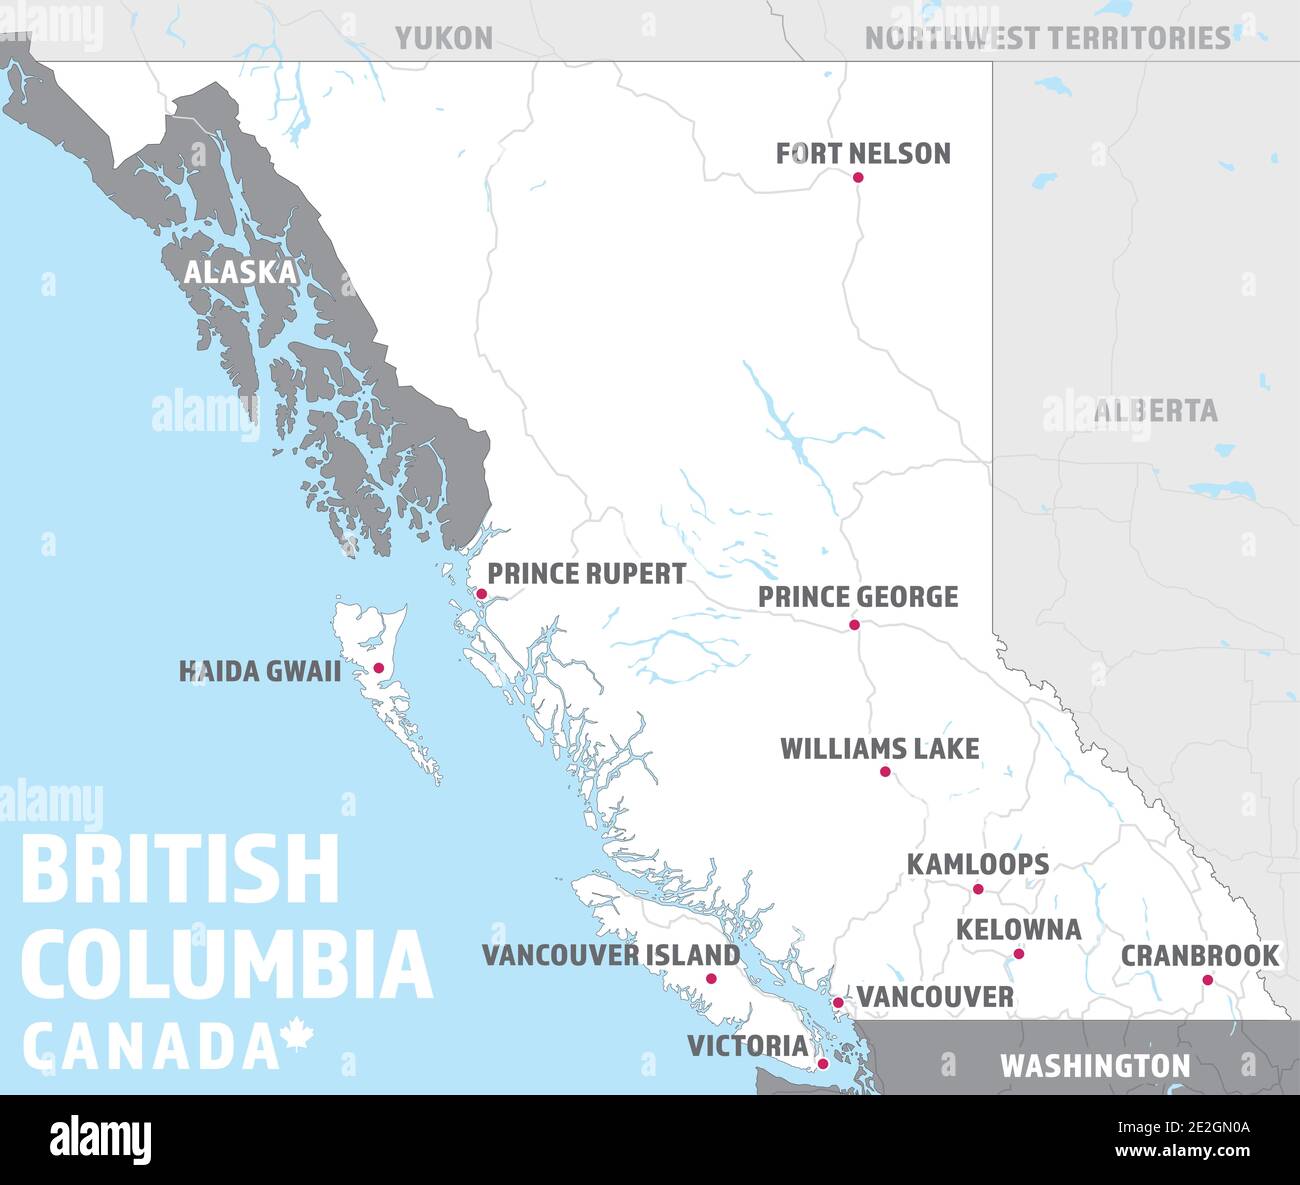 Map of British Columbia, Canada. Simple touristic BC travel map with destination cities, highways, lakes and surrounding Canadian provinces. Stock Vector